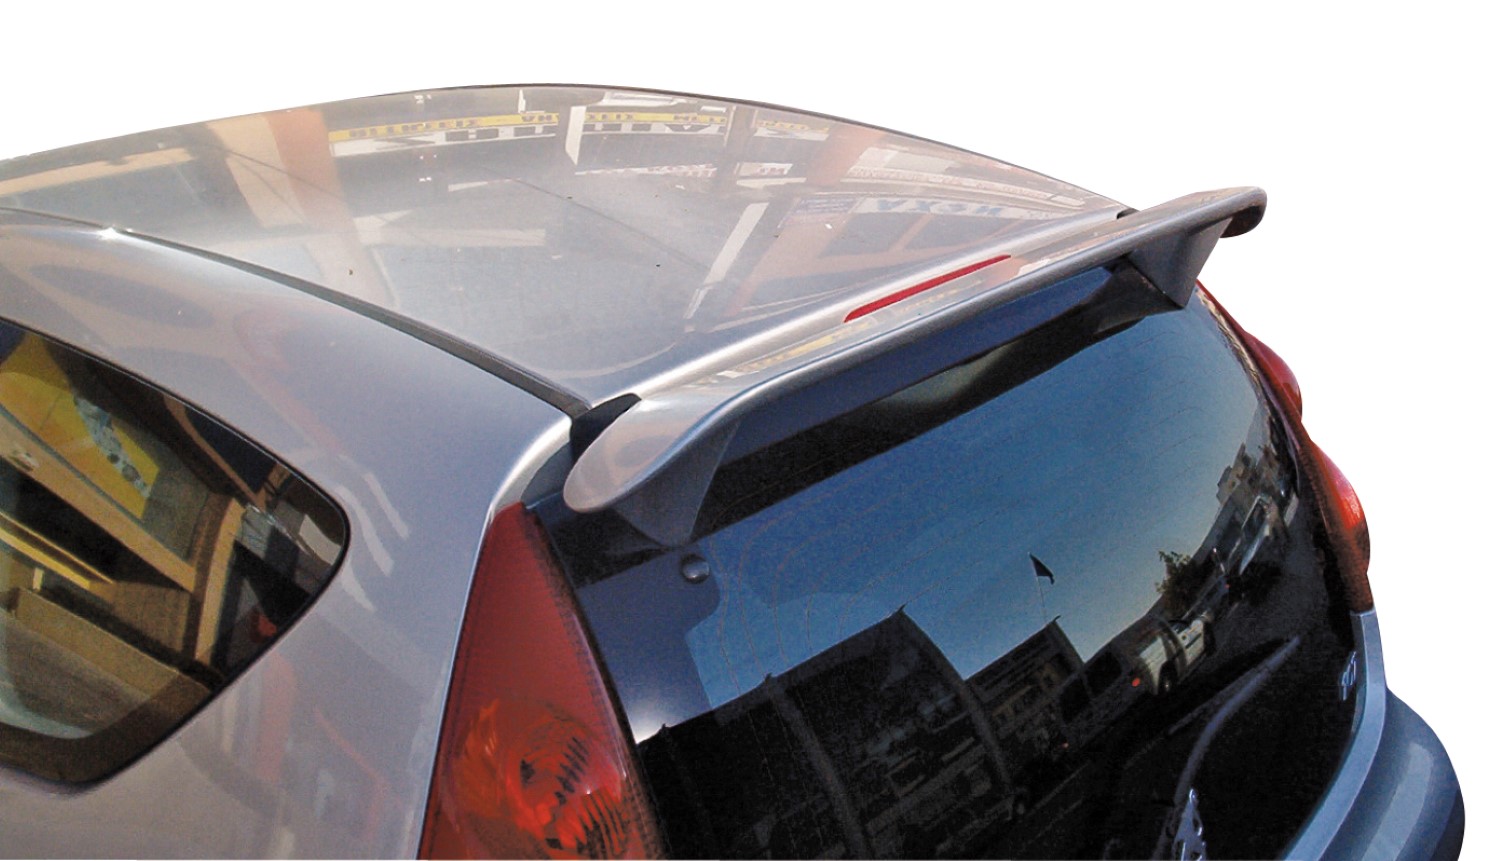 Details about   SPOILER REAR ROOF CITROEN C1 WING ACCESSORIES